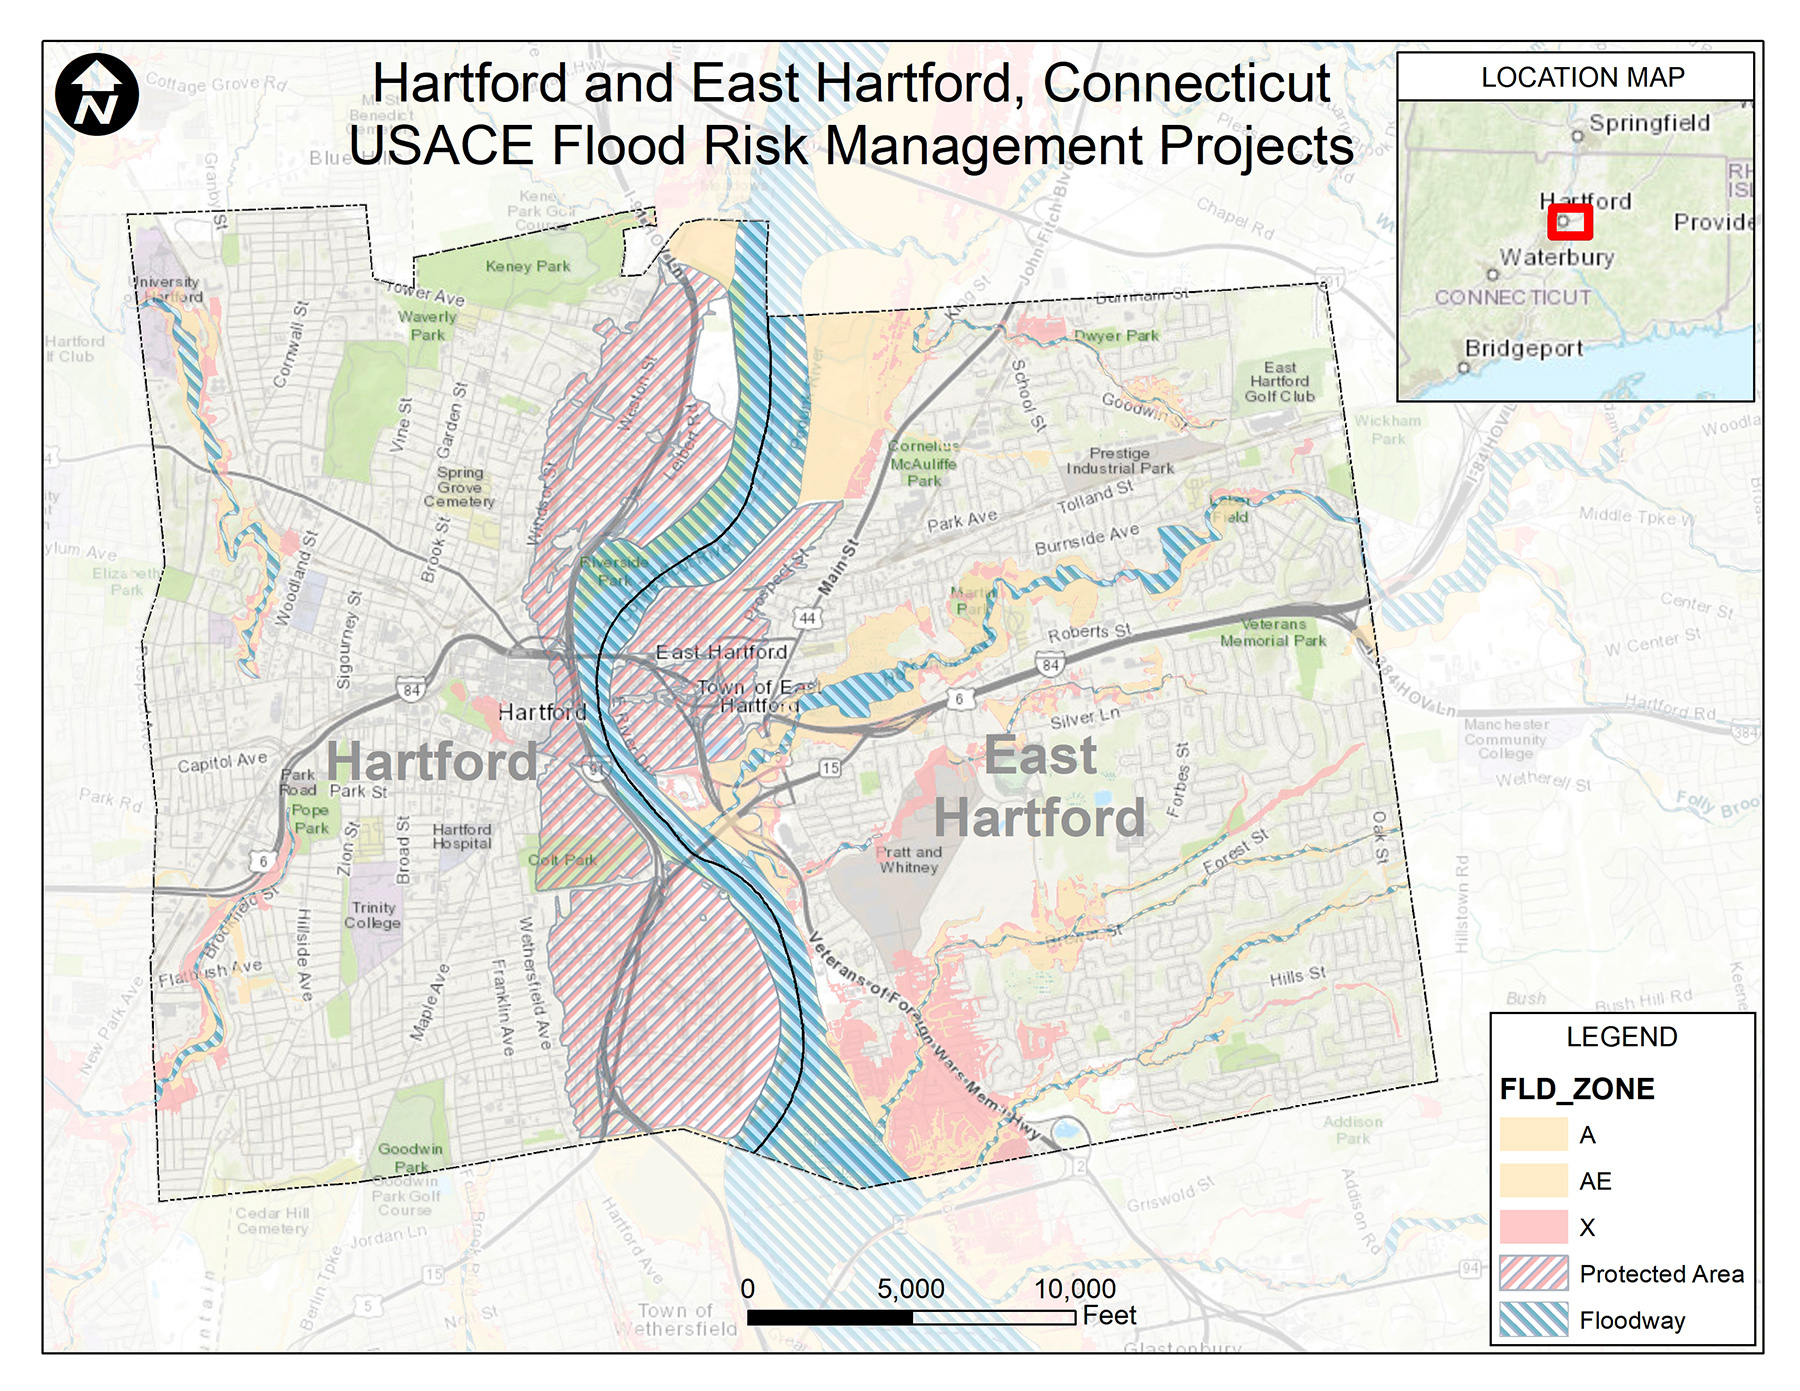 graphic showing study area in Hartford and East Hartford, Connecticut